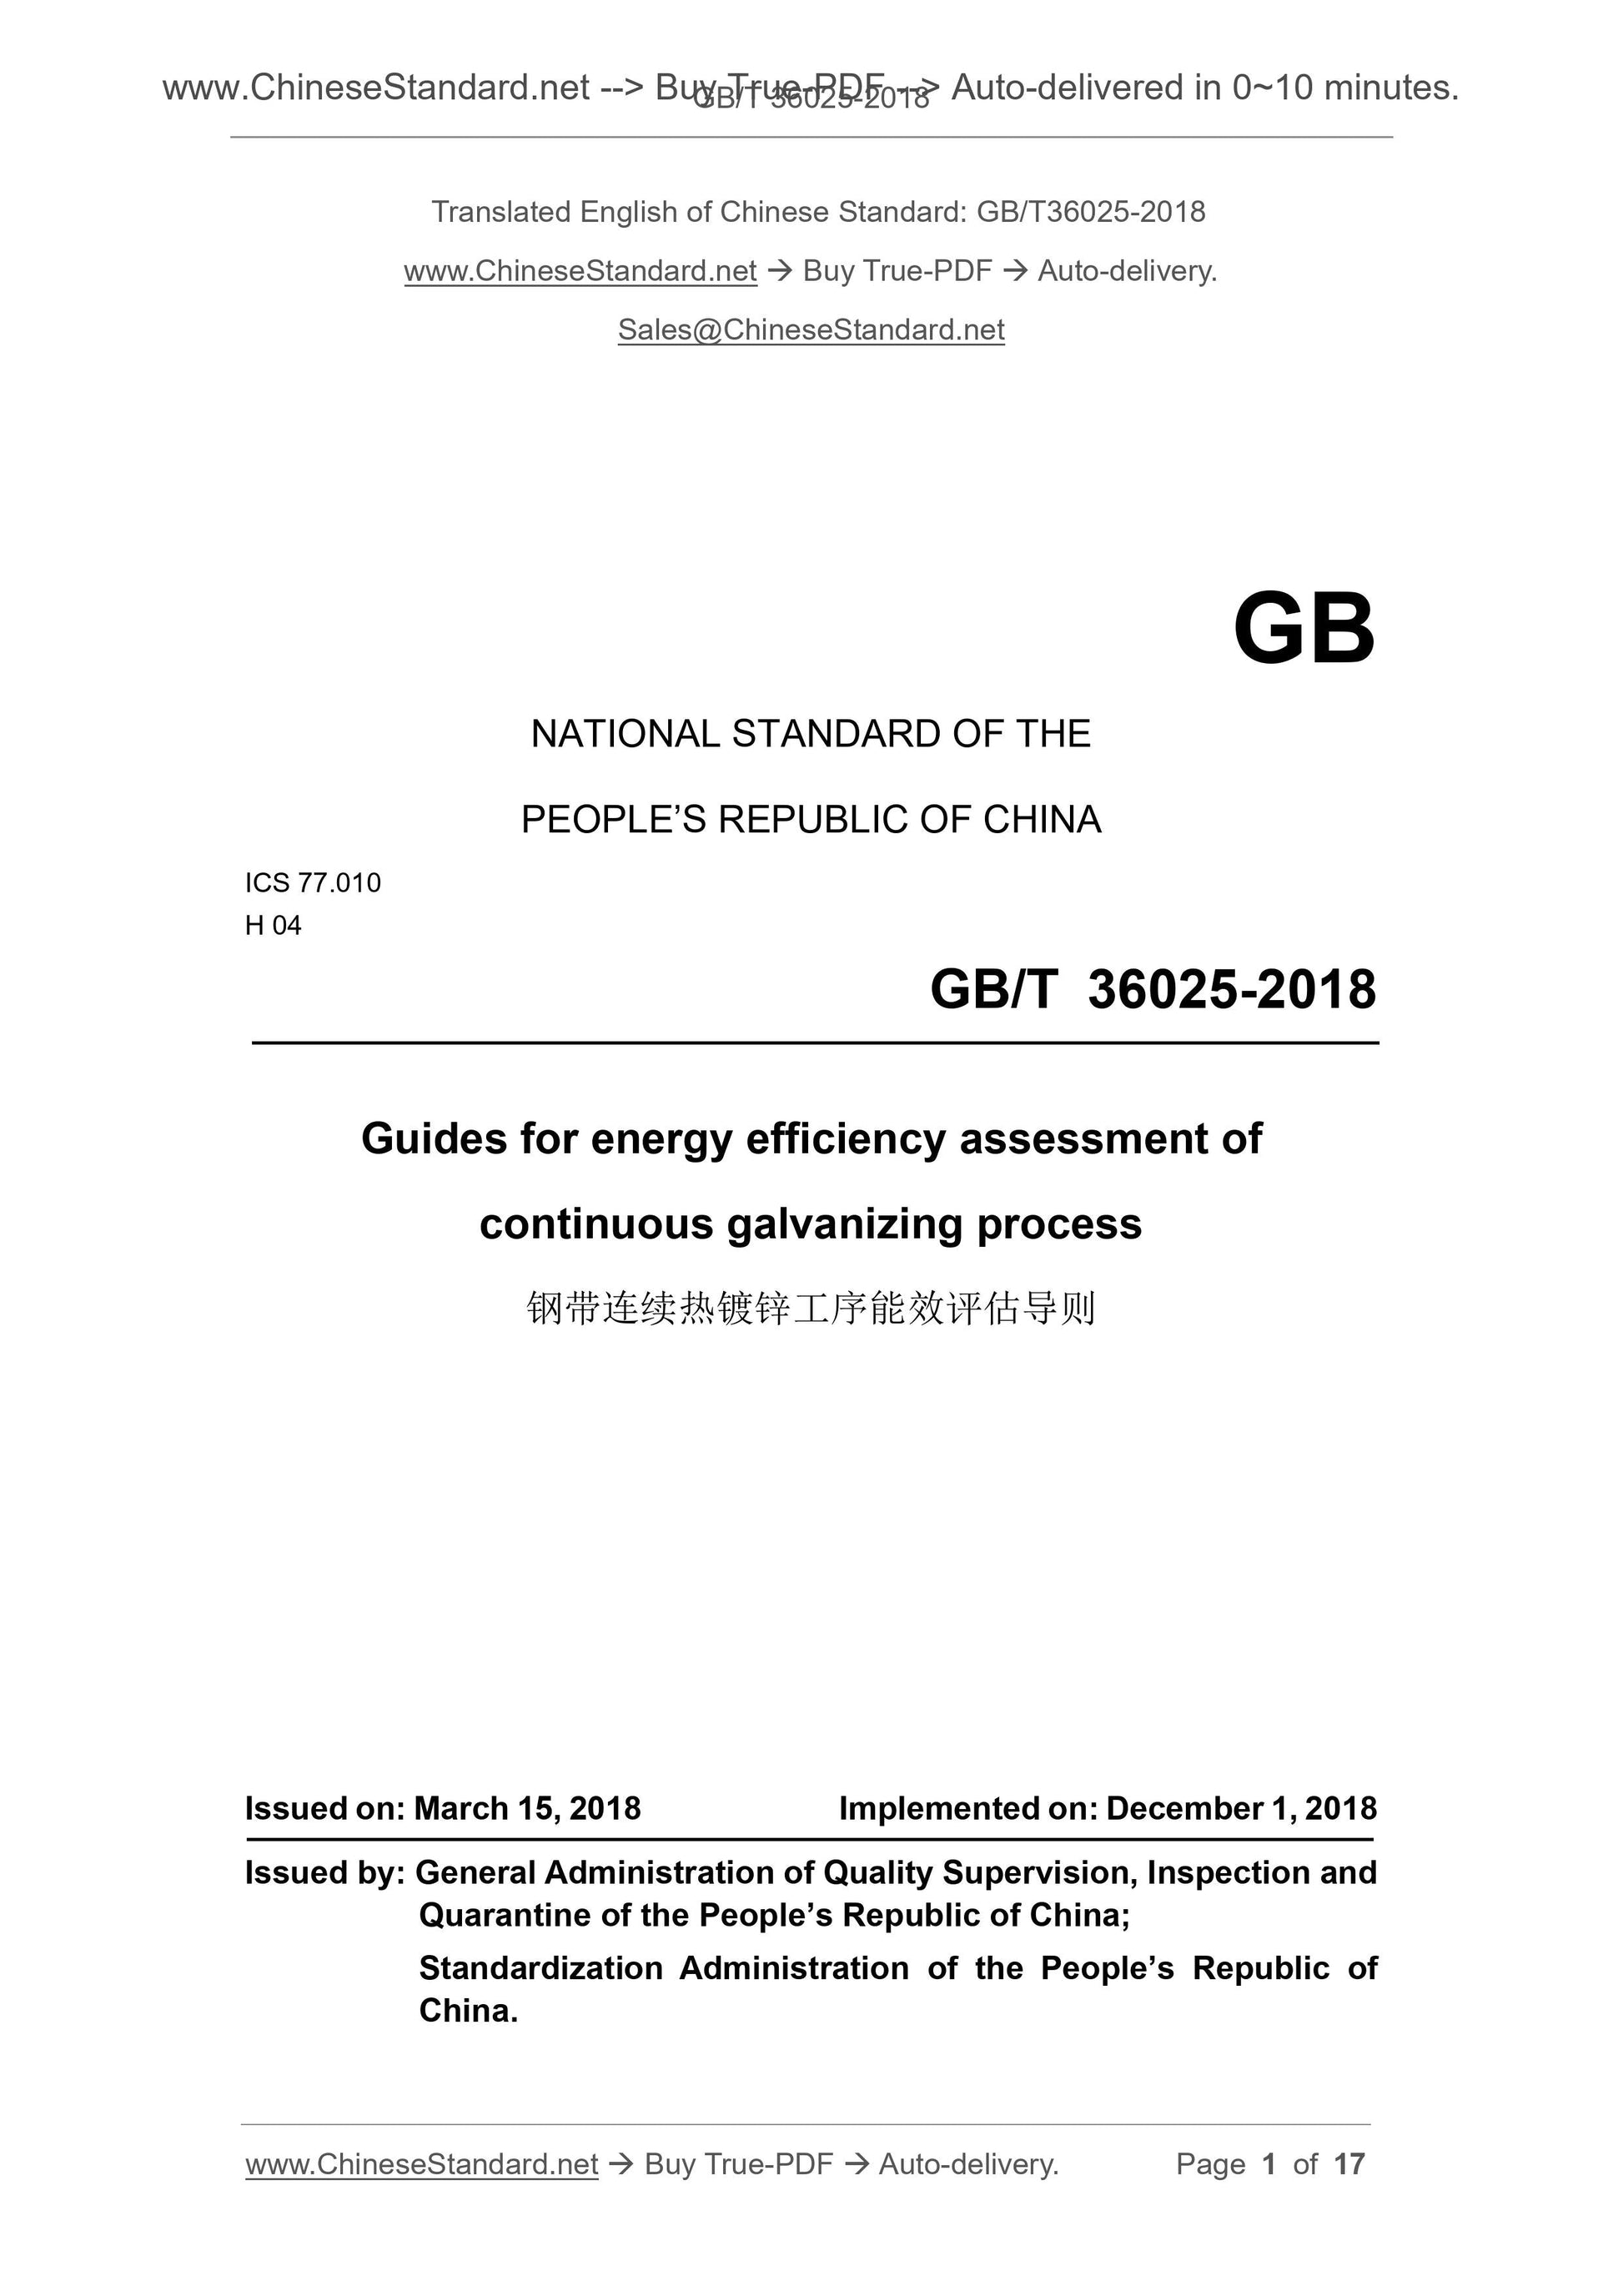 GB/T 36025-2018 Page 1